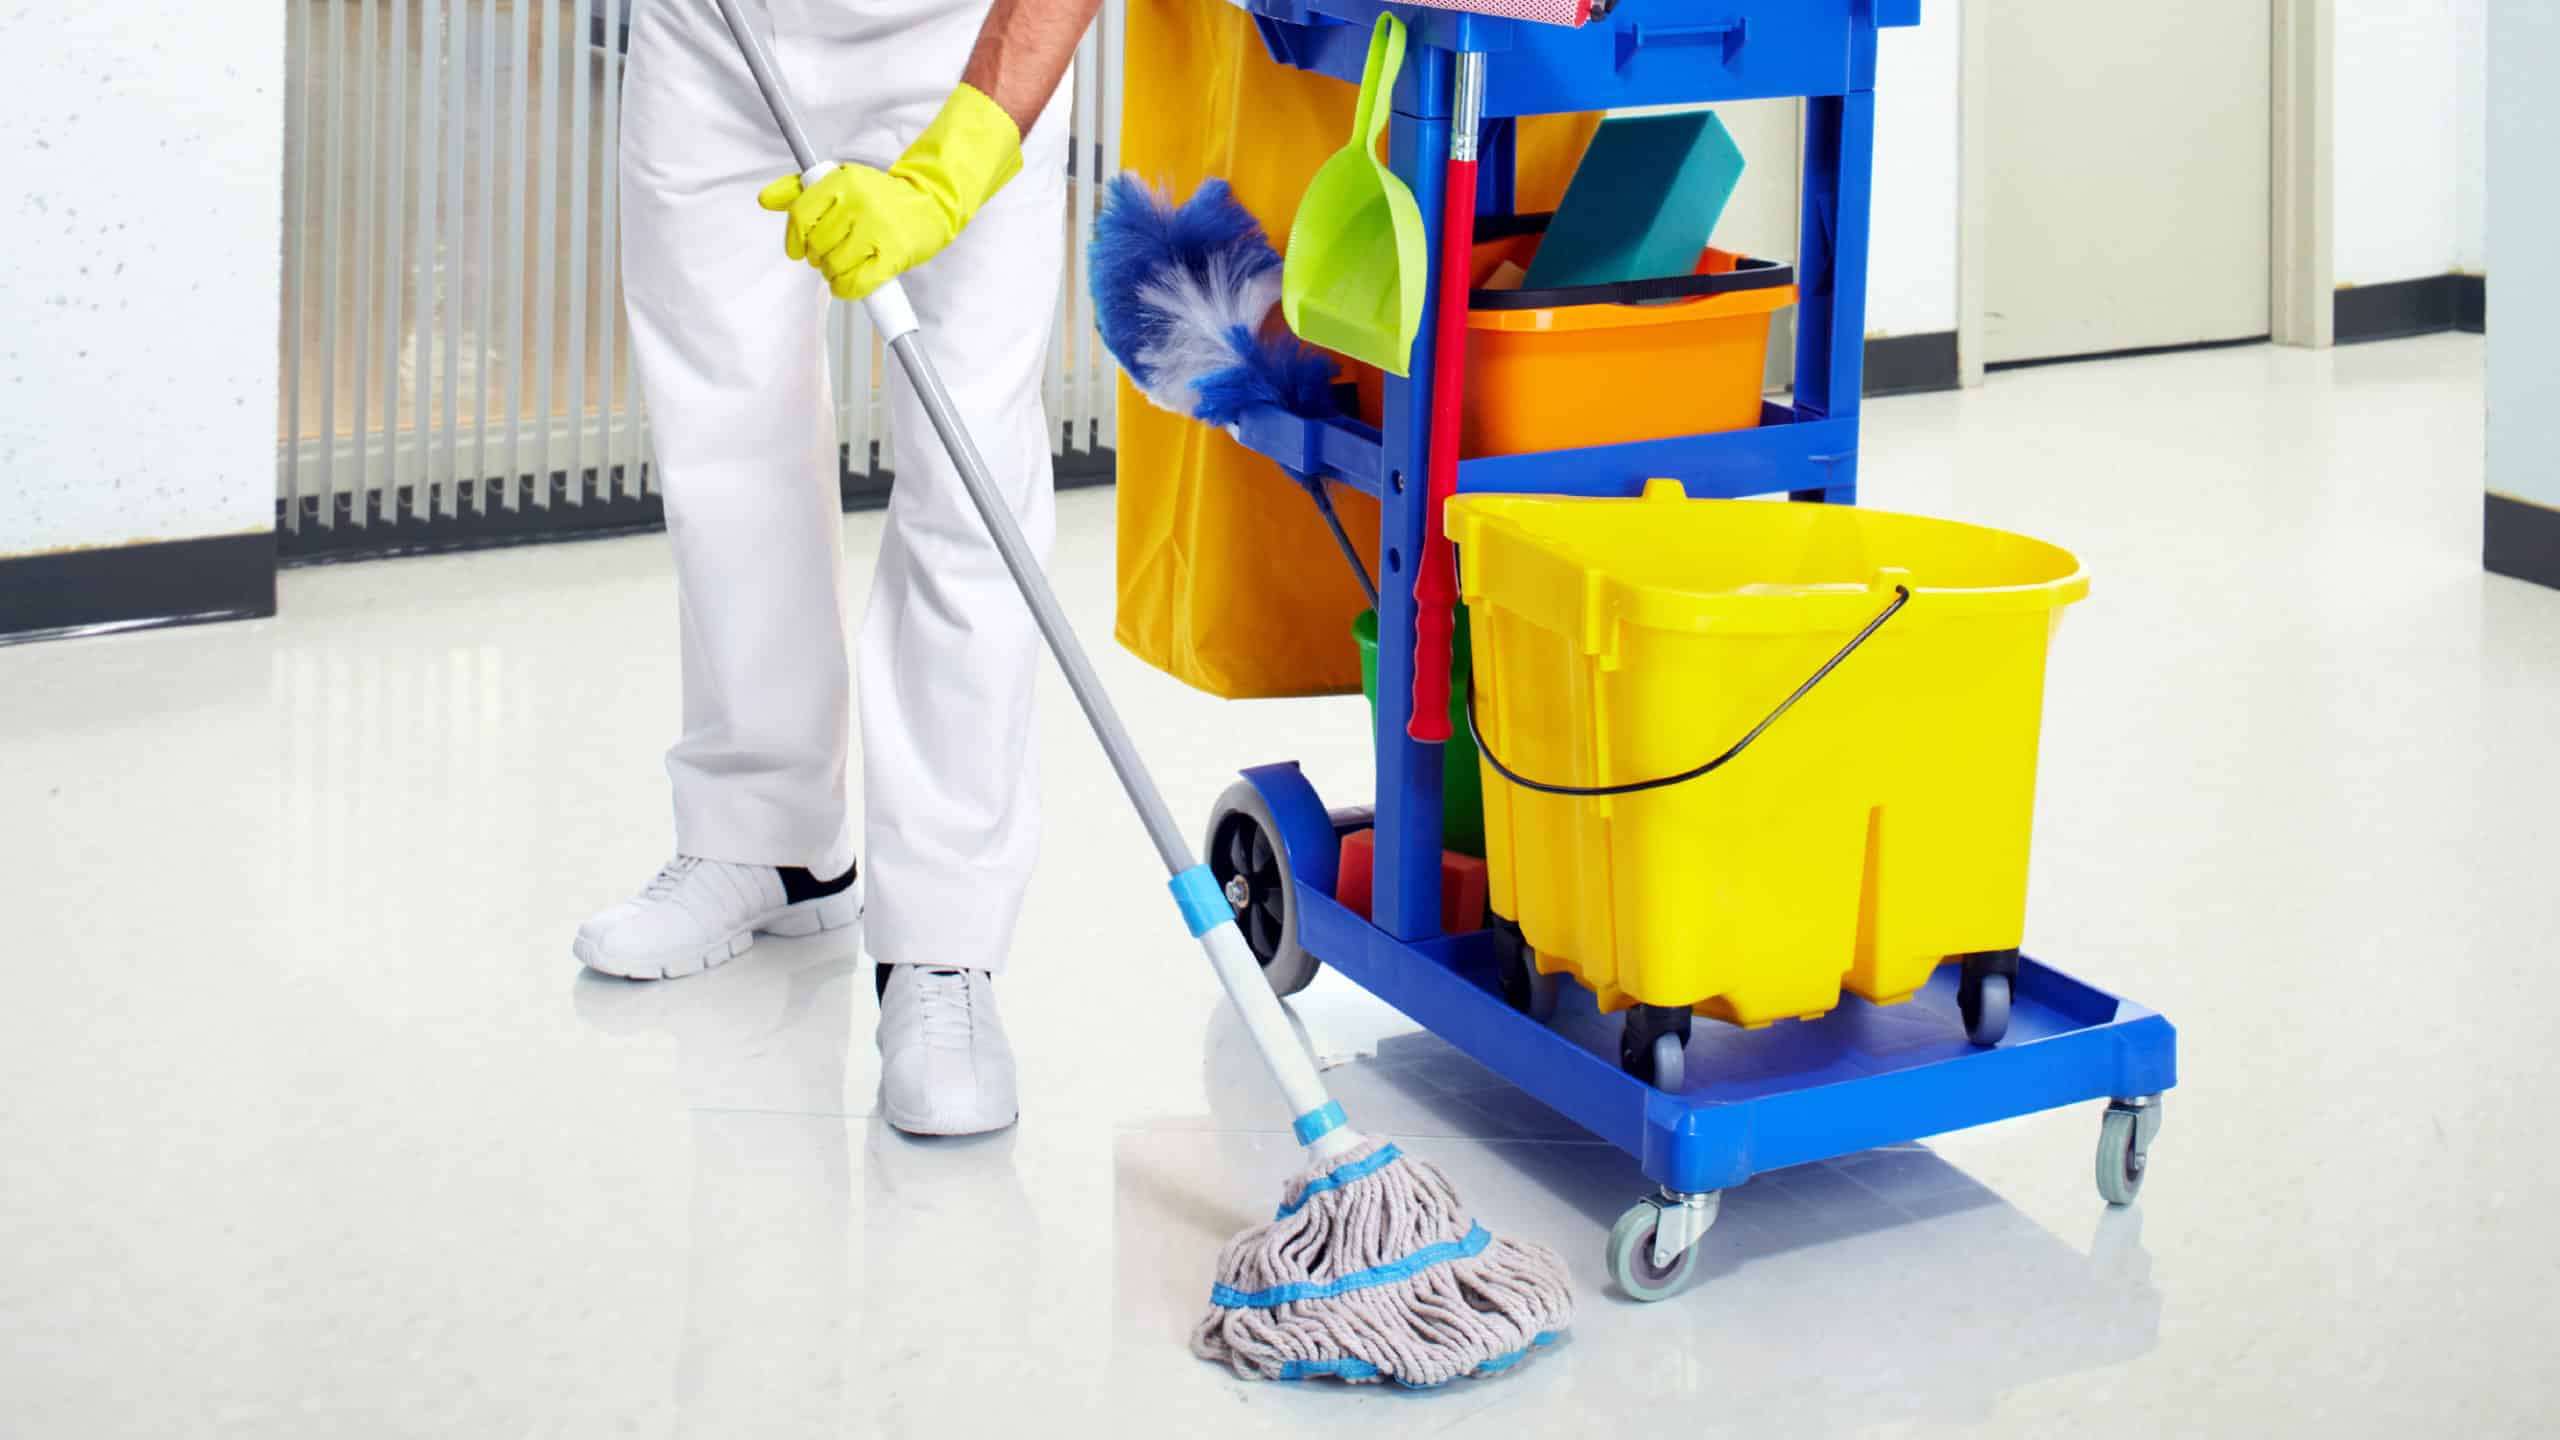 A school janitor wipes a linoleum floor with a traditional mop, a janitorial cart with a bucket of water stands nearby.